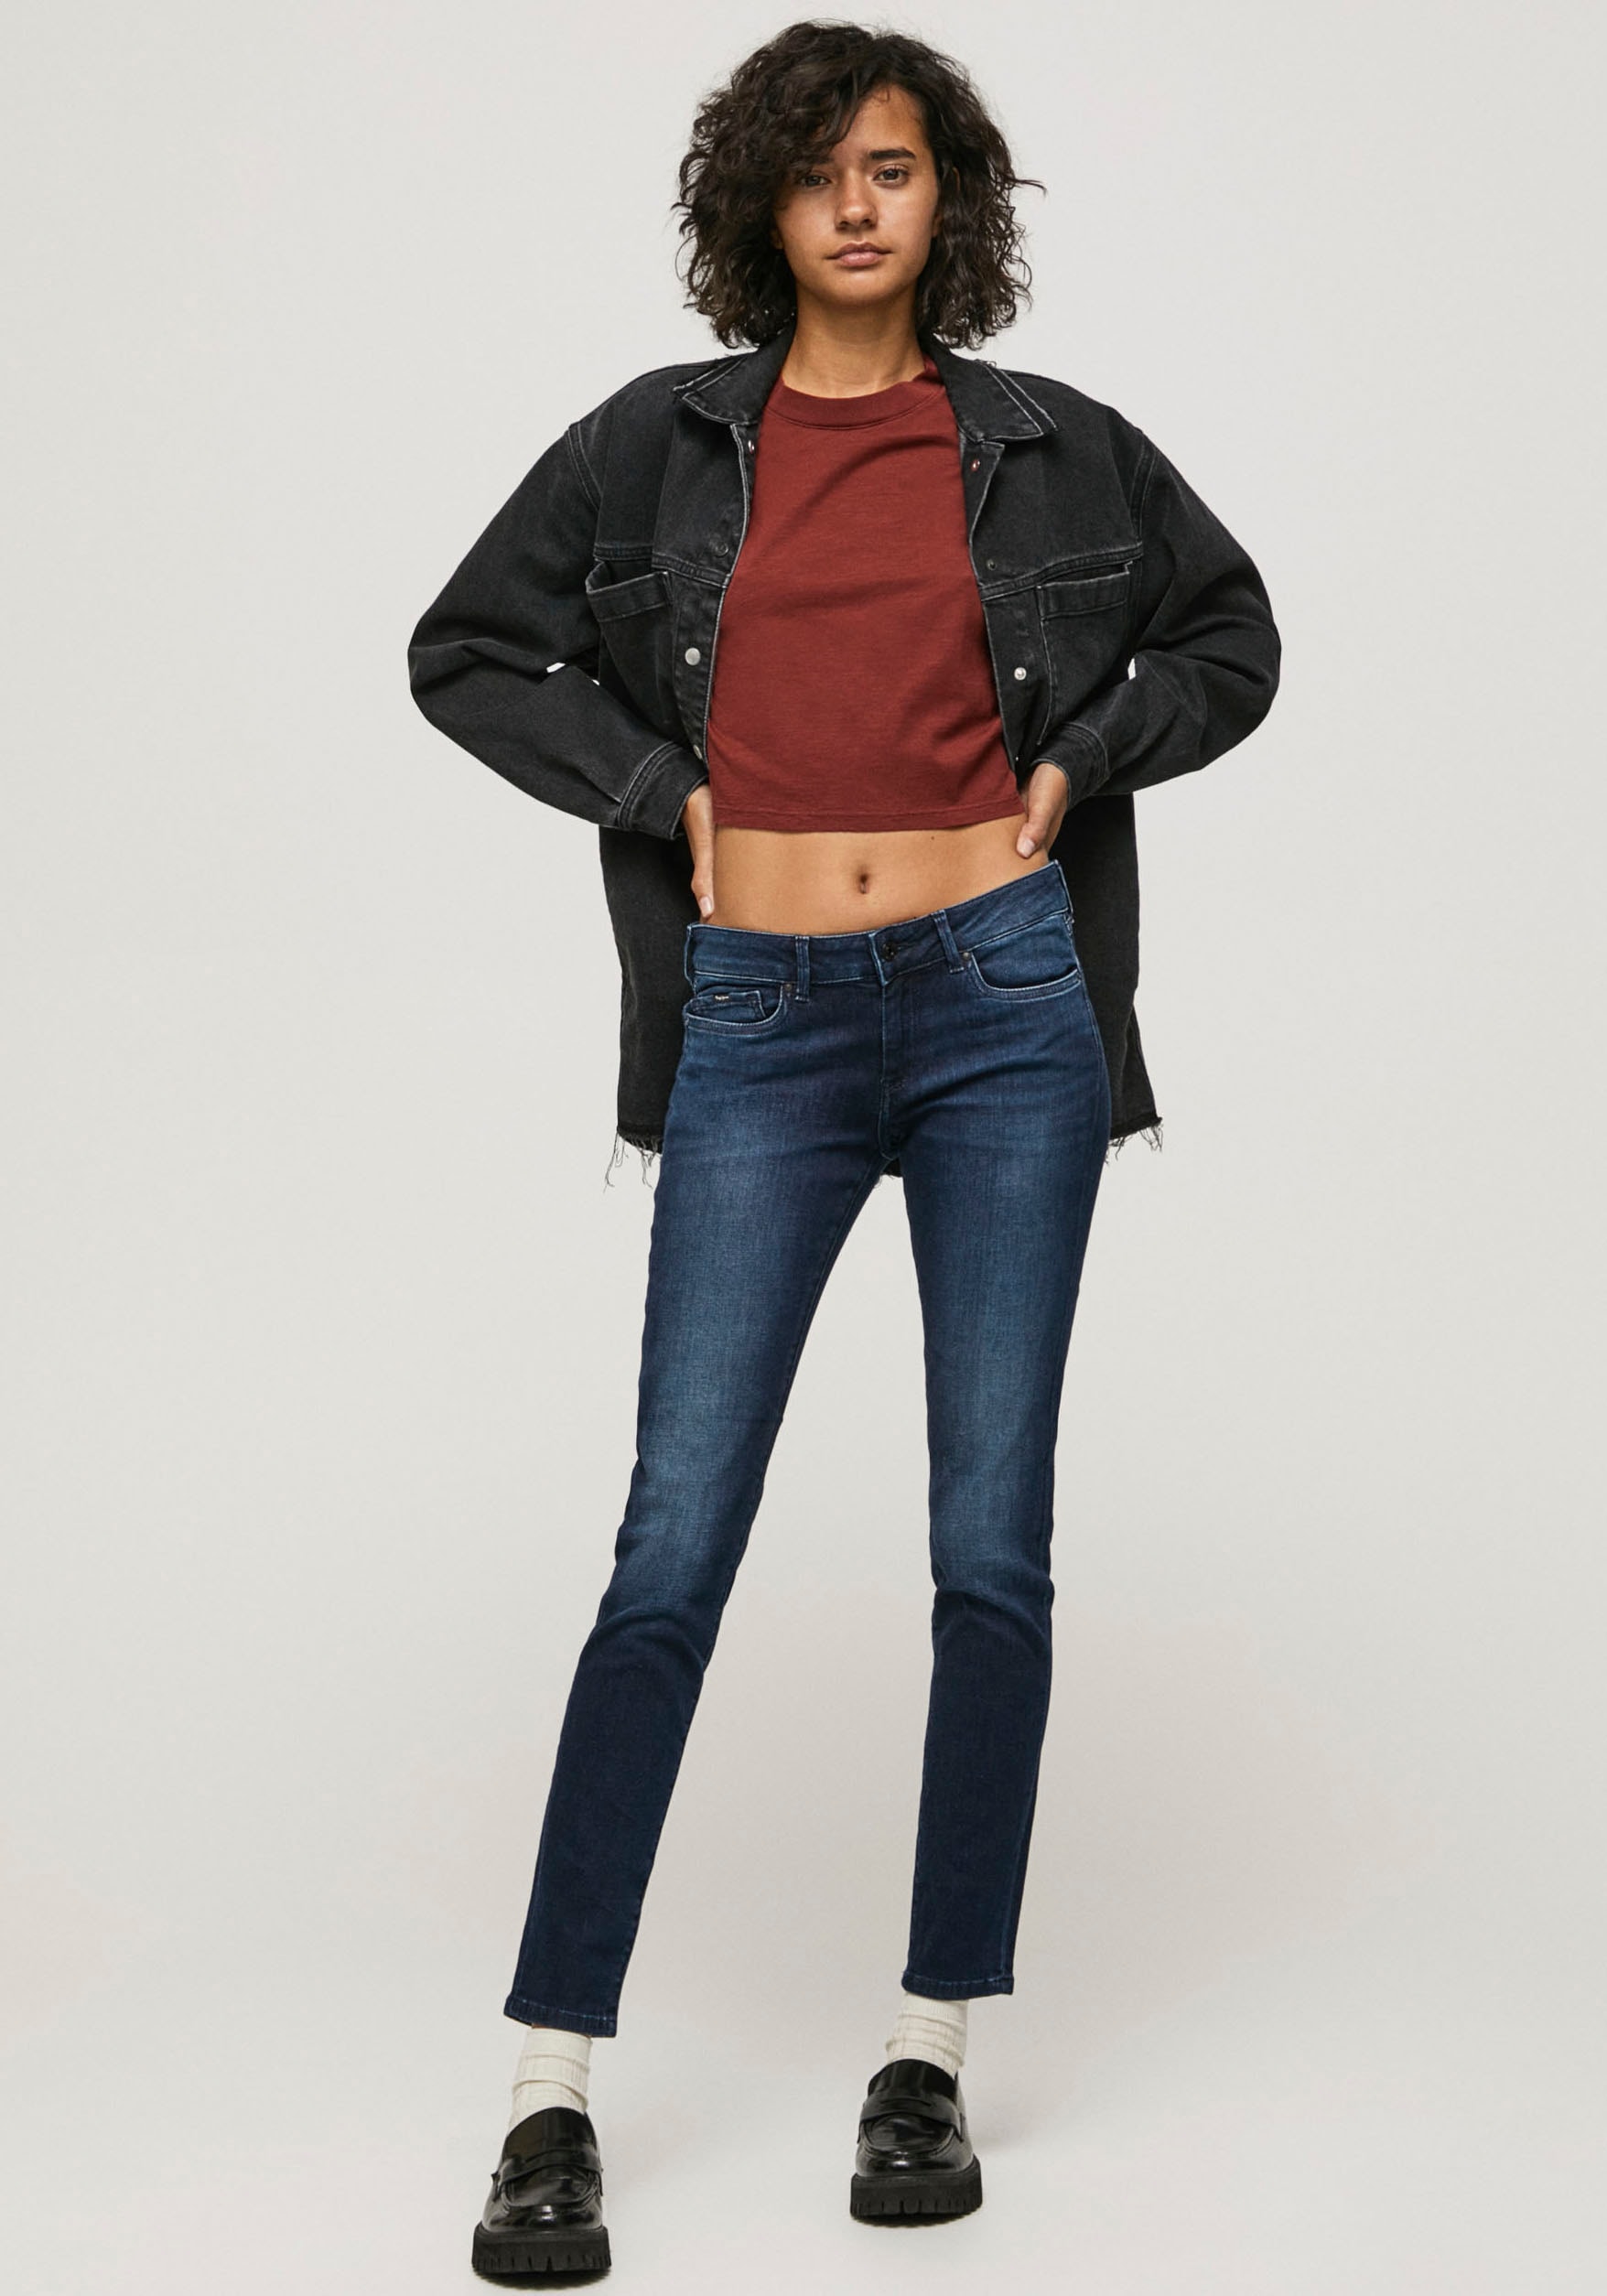 Pepe Jeans Skinny-fit-Jeans »PIXIE« online bei OTTO